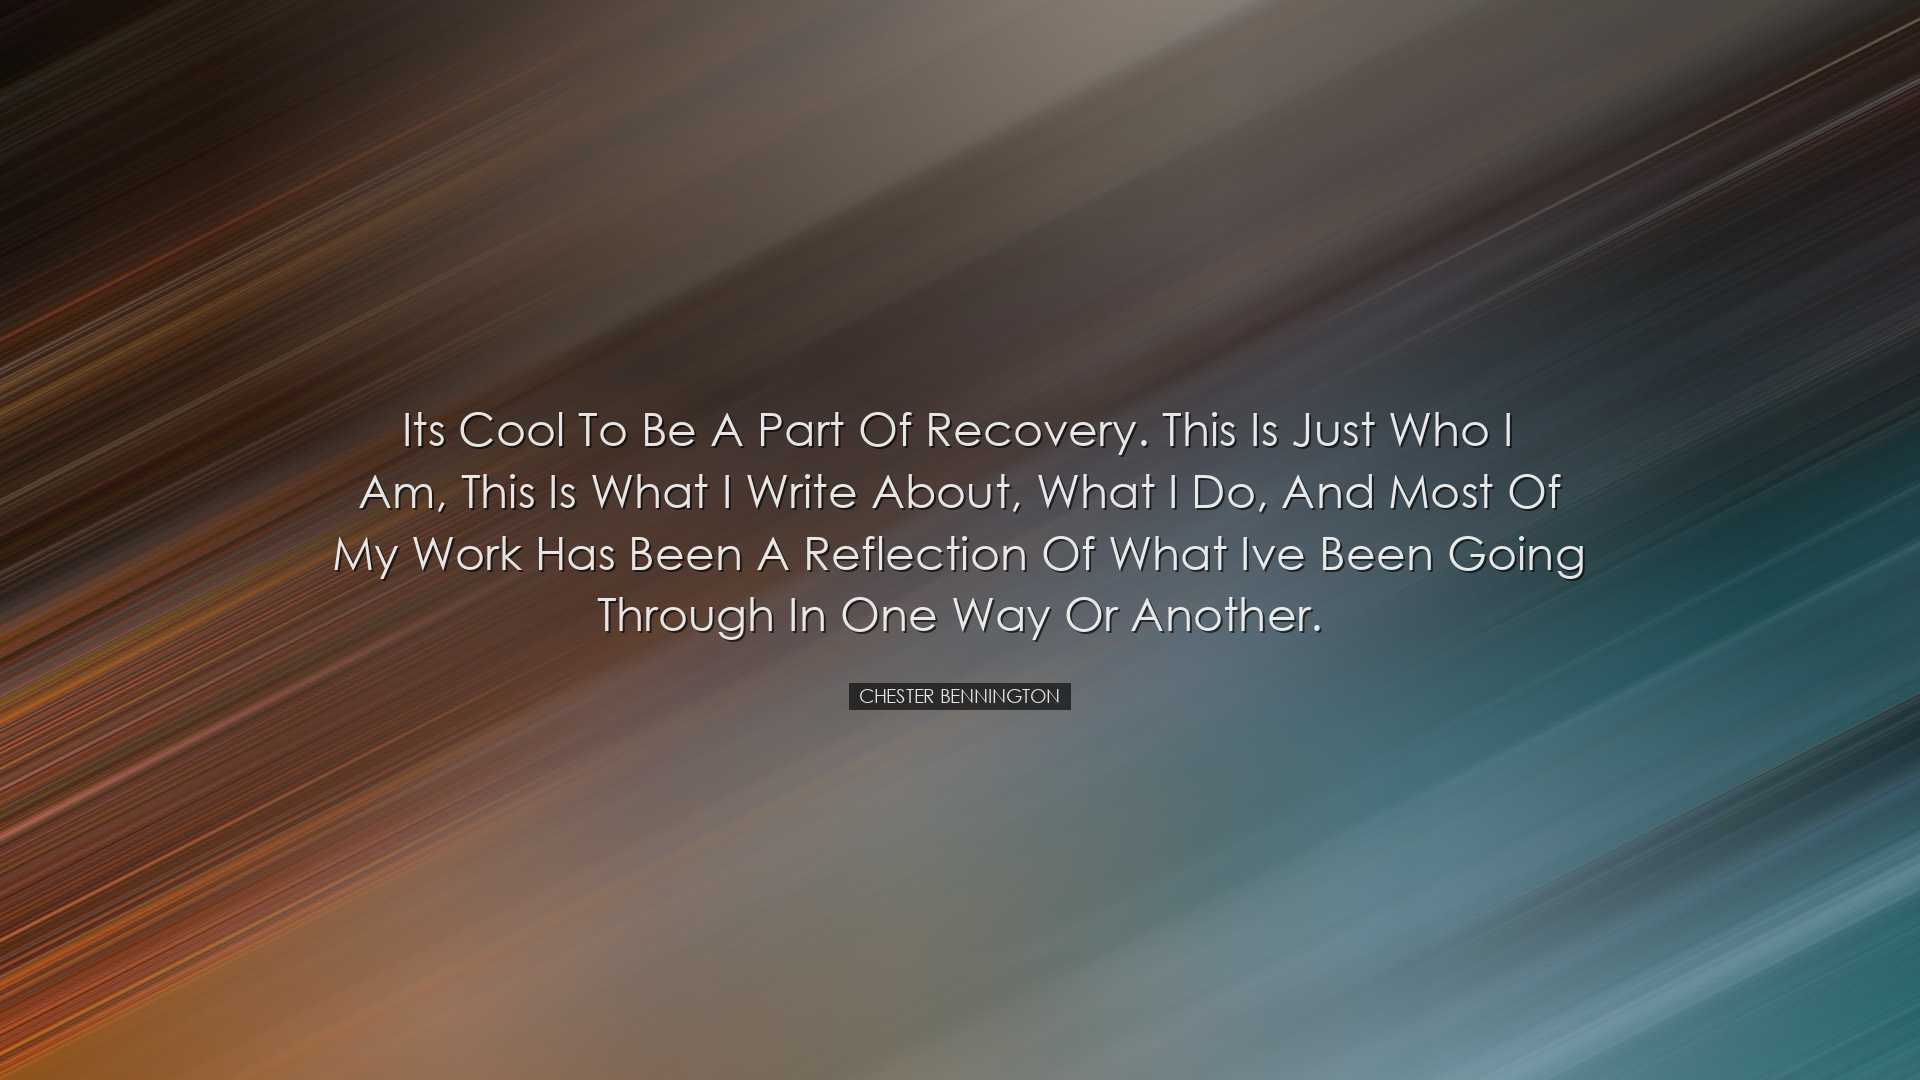 Its cool to be a part of recovery. This is just who I am, this is